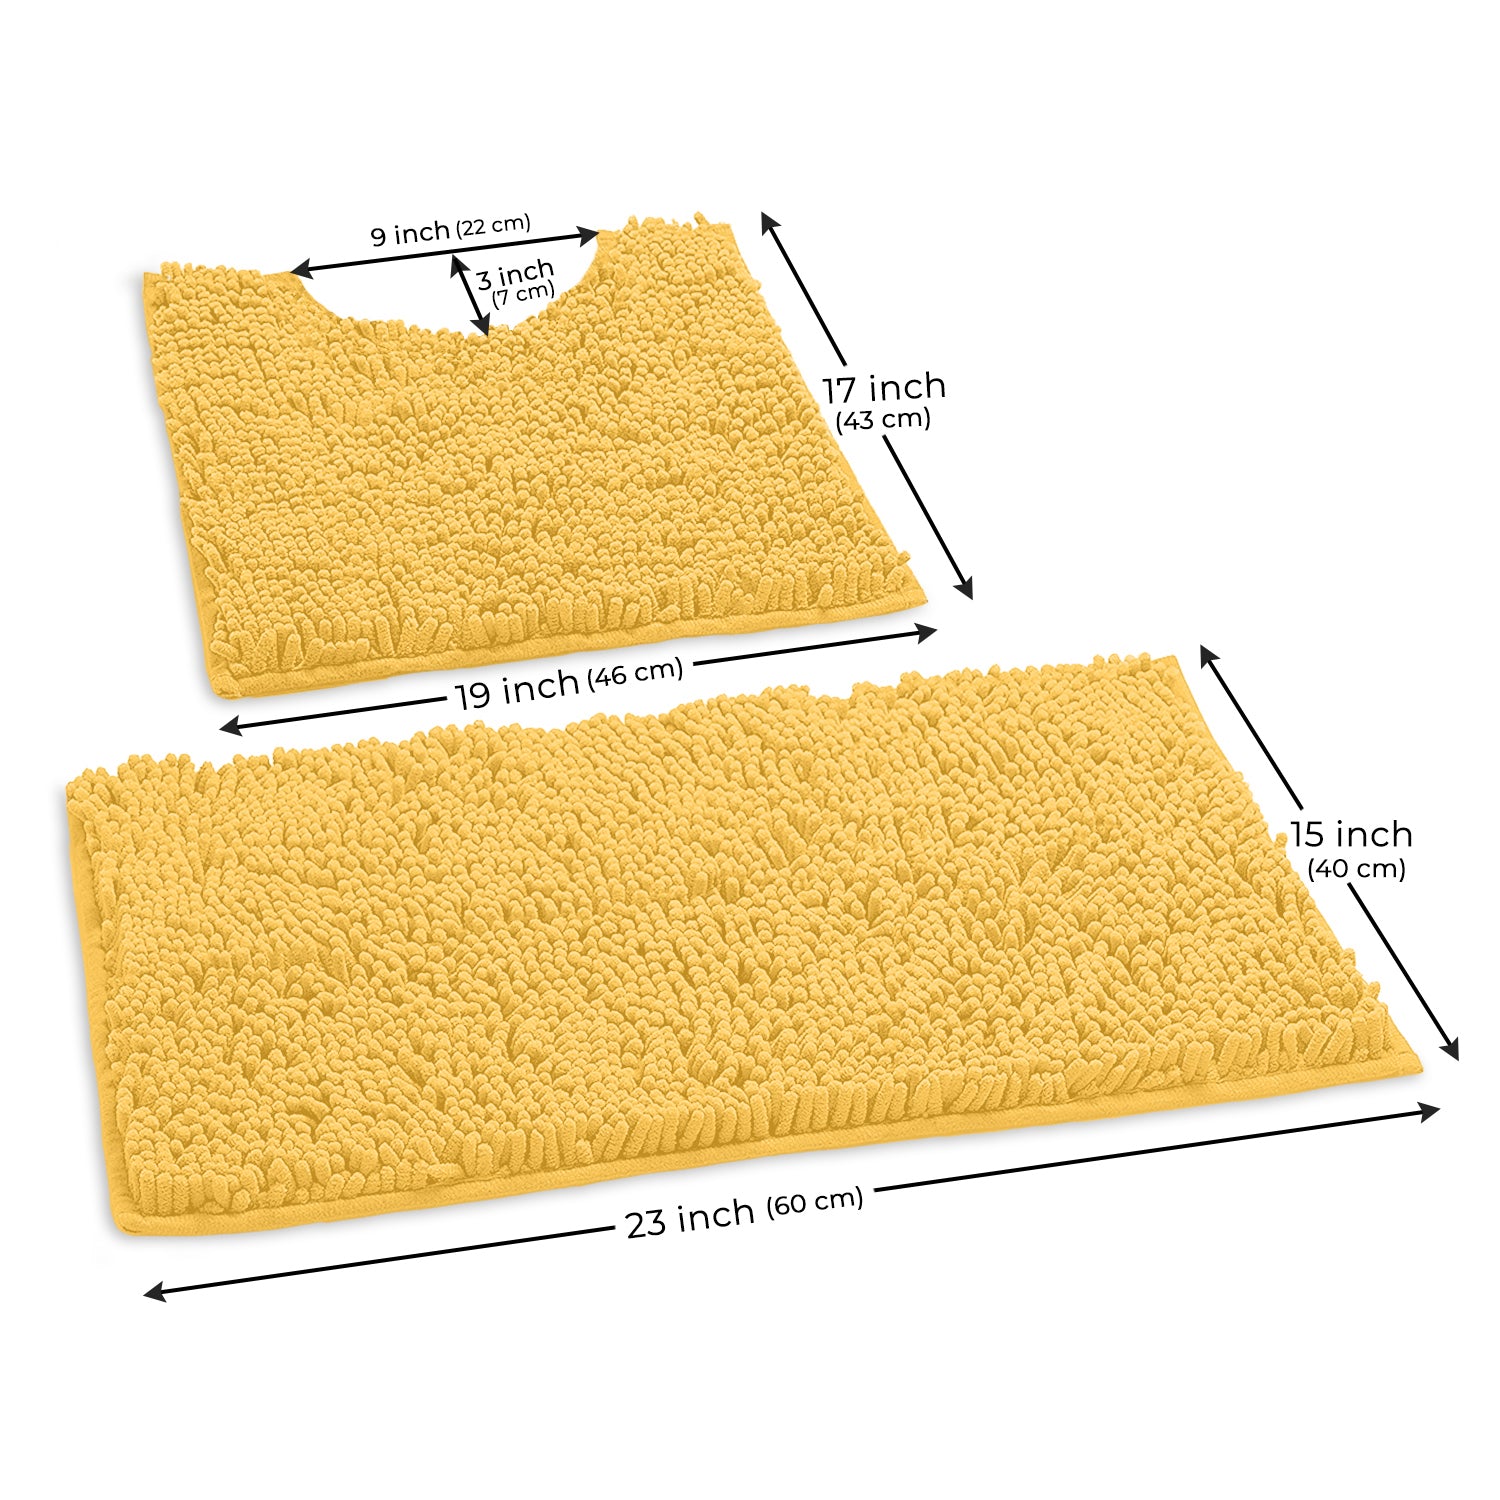 A Popular Bath Mat Is on Sale for as Little as $7 at